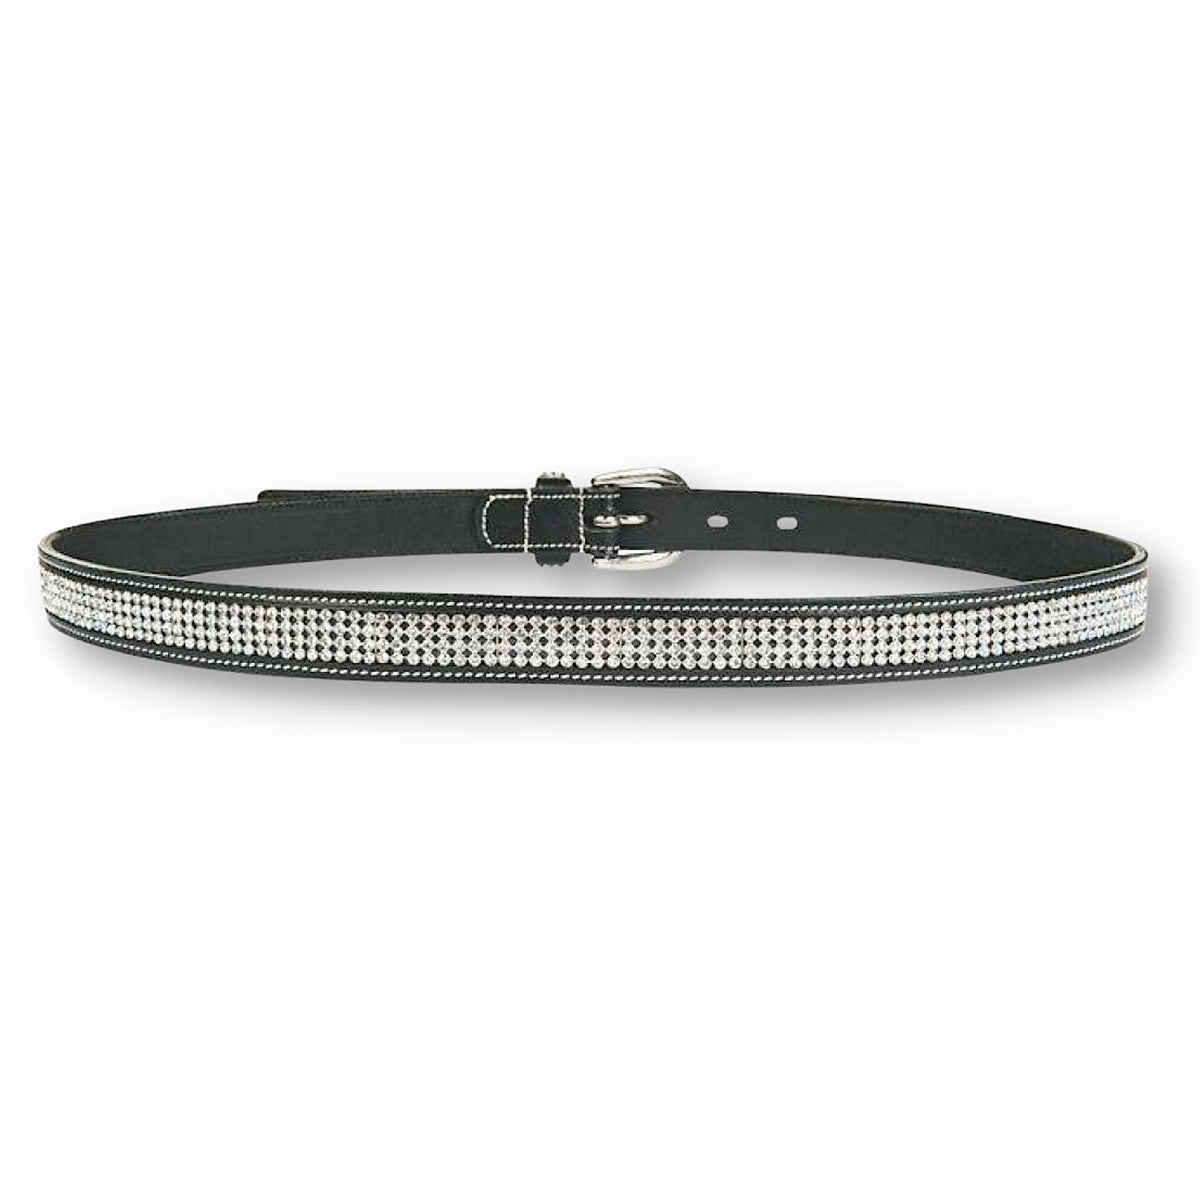 Black leather belt with white thread and rows of clear diamantes.